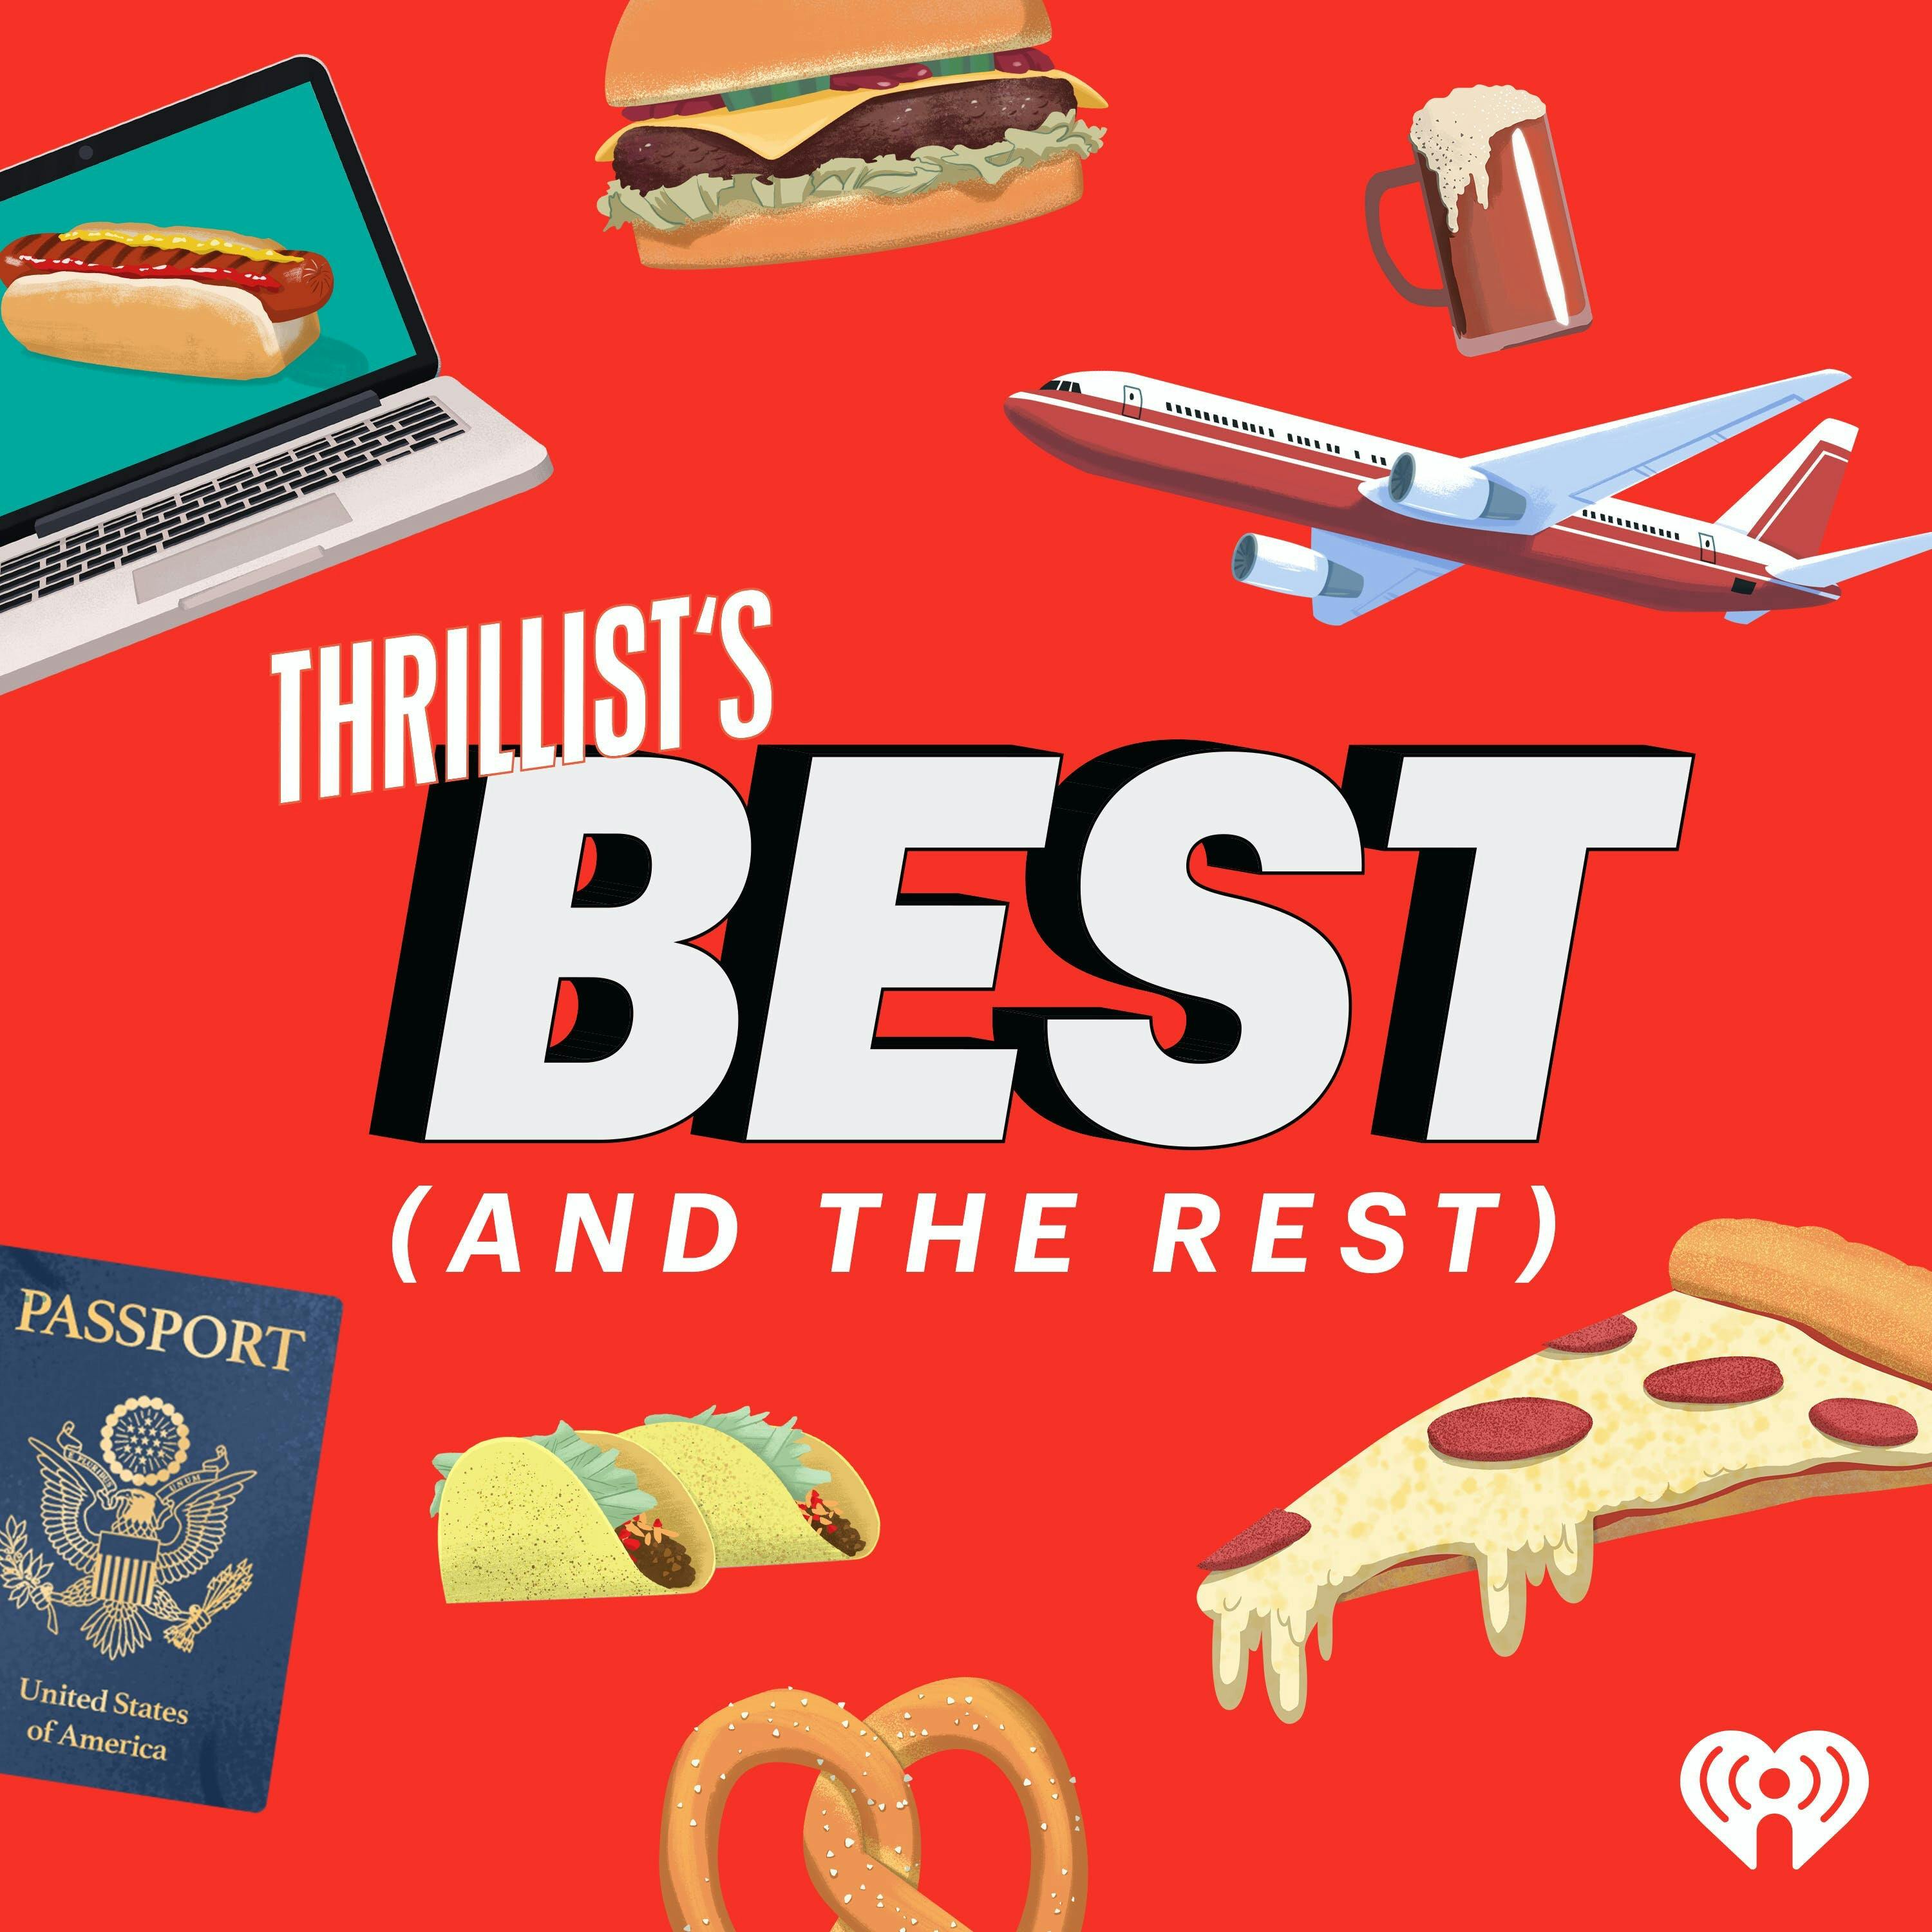 THRILLIST’S BEST: How the Service Industry Is Helping Each Other Right Now